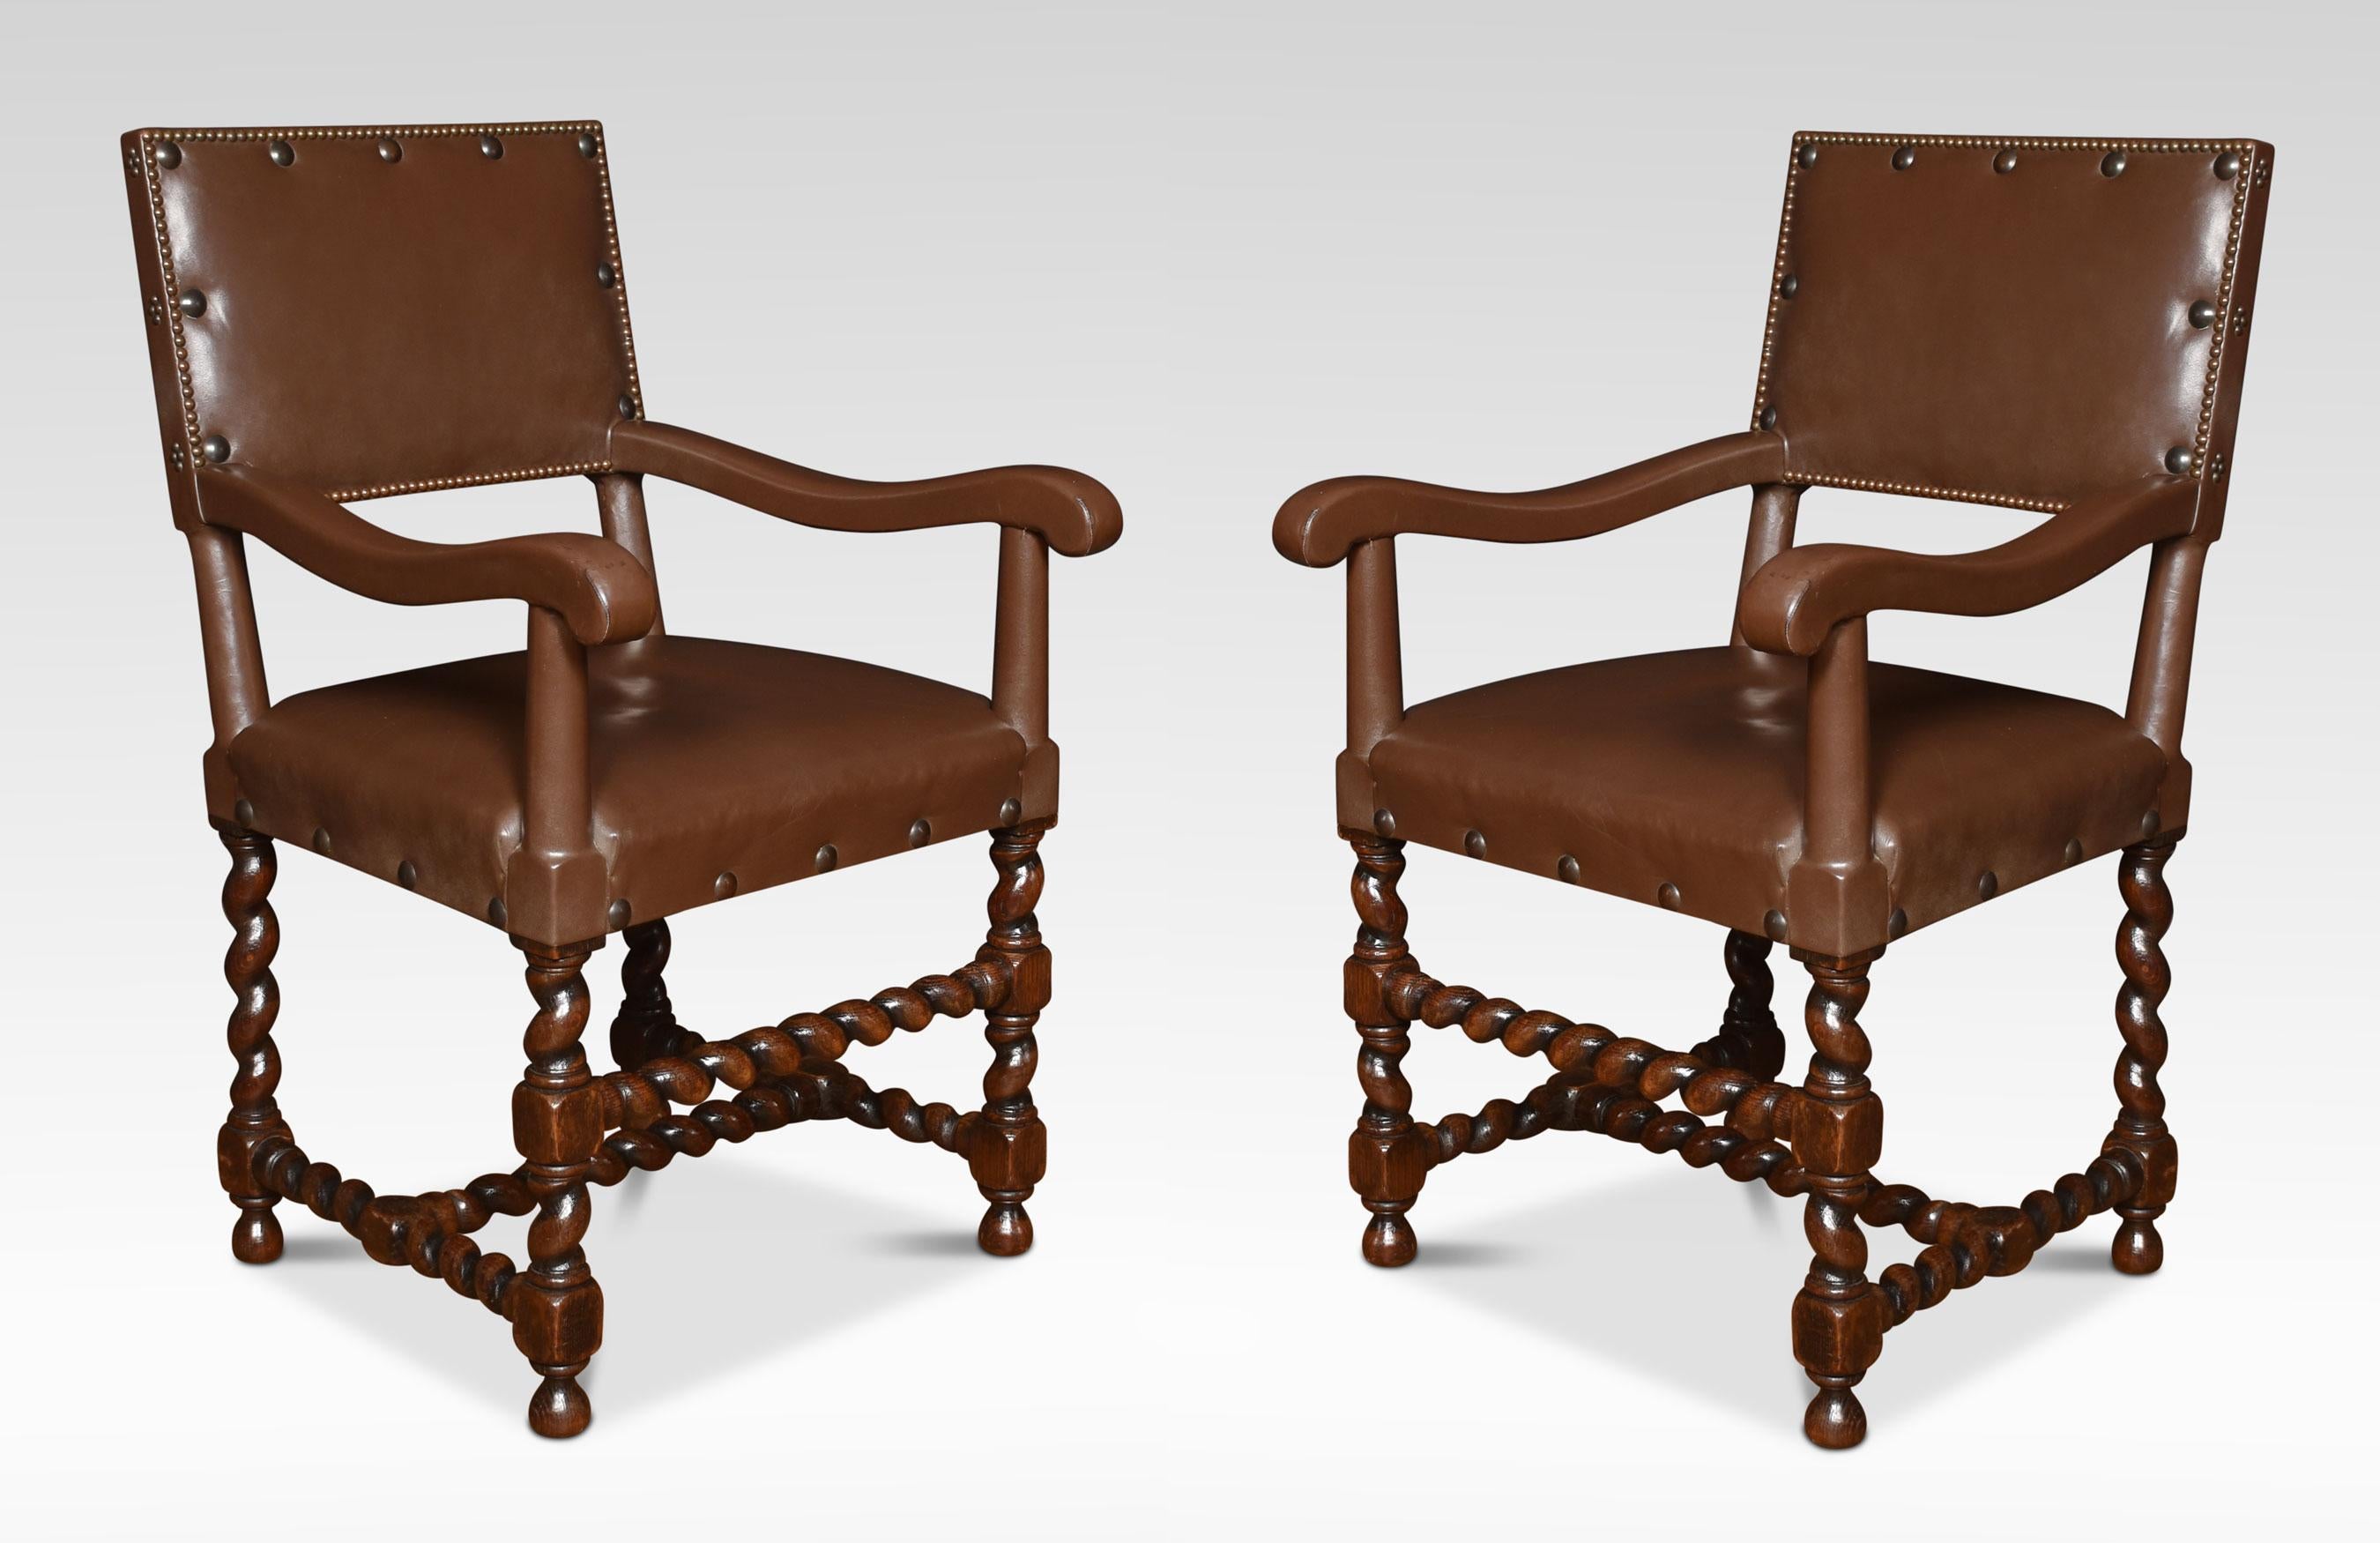 Set of eight dining chairs the square leather nailed backs above overstuffed seats the carvers with padded arms all raised up on turned front legs united by stretchers.
Dimensions
Armchairs
Height 37.5 Inches Height to seat 20.5 Inches
Width